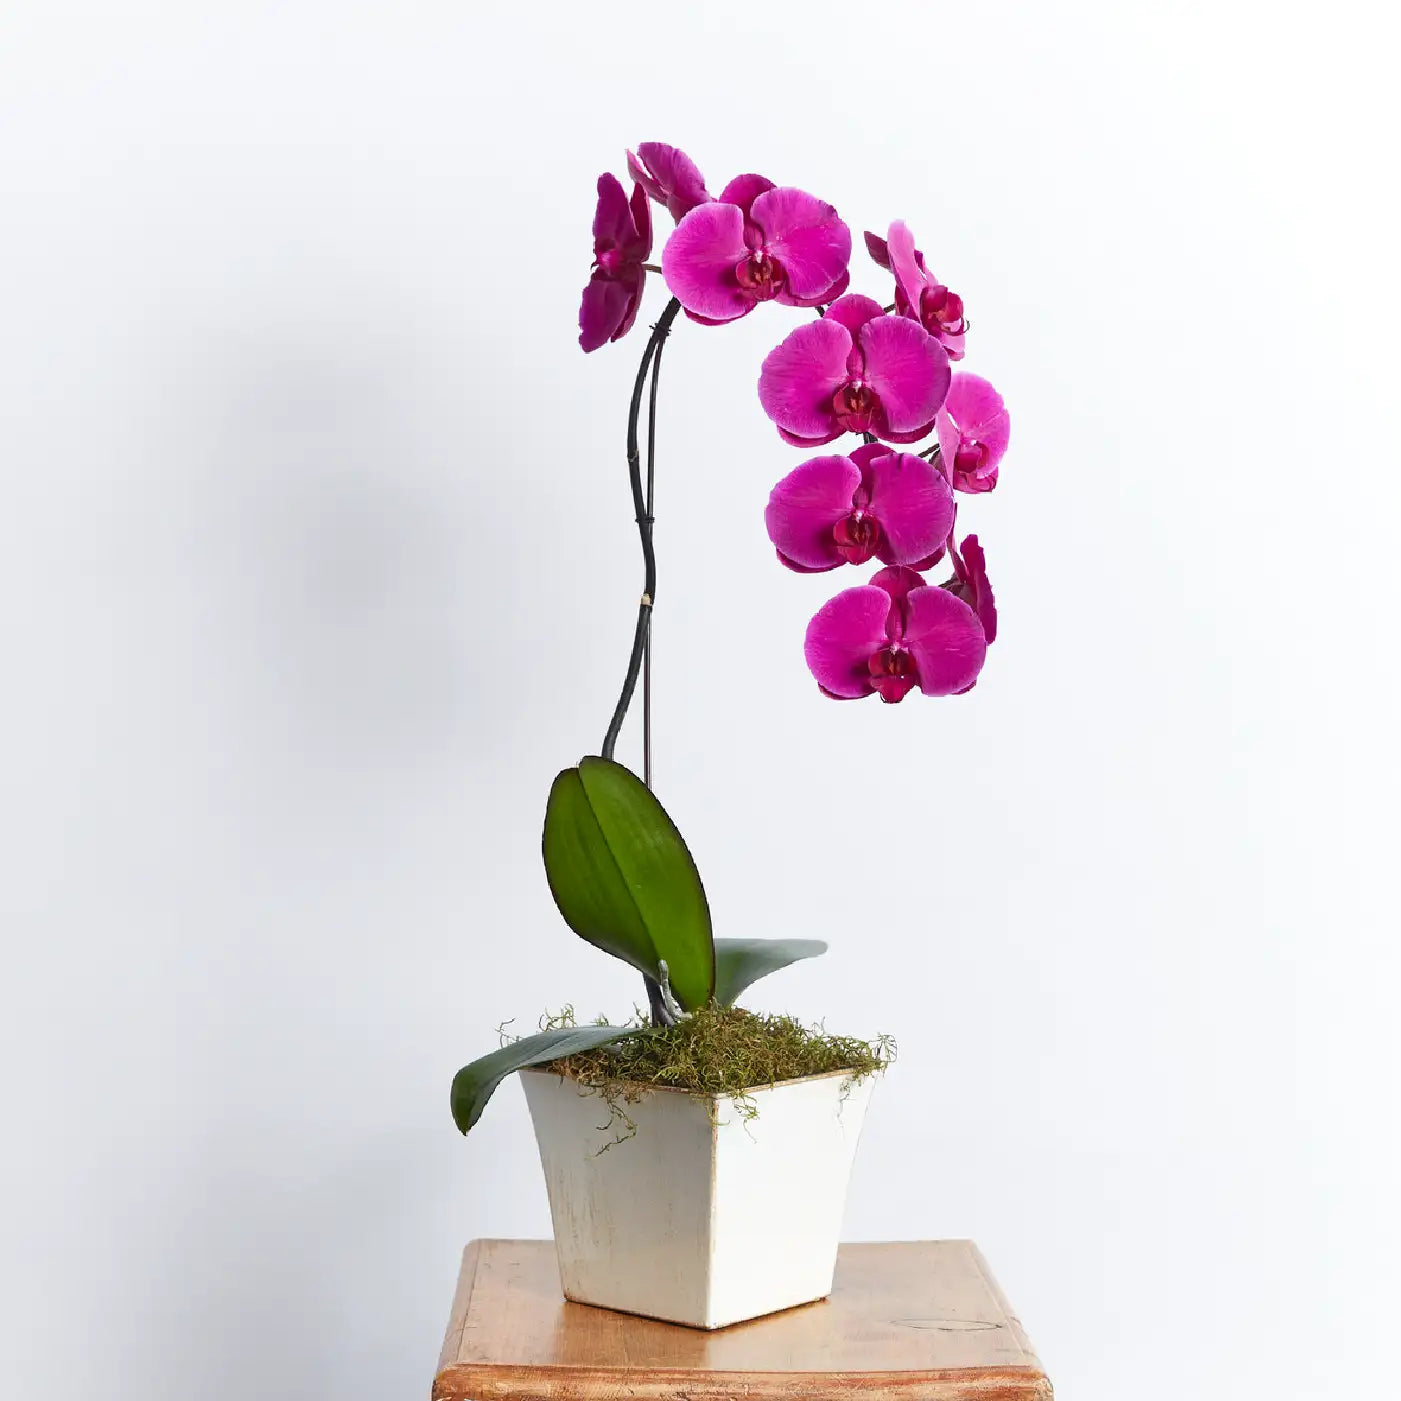 A stunning purple orchid plant in a white ceramic pot, displayed on a wooden table against a plain background. Business Gifting. Fabulous Flowers and Gifts.